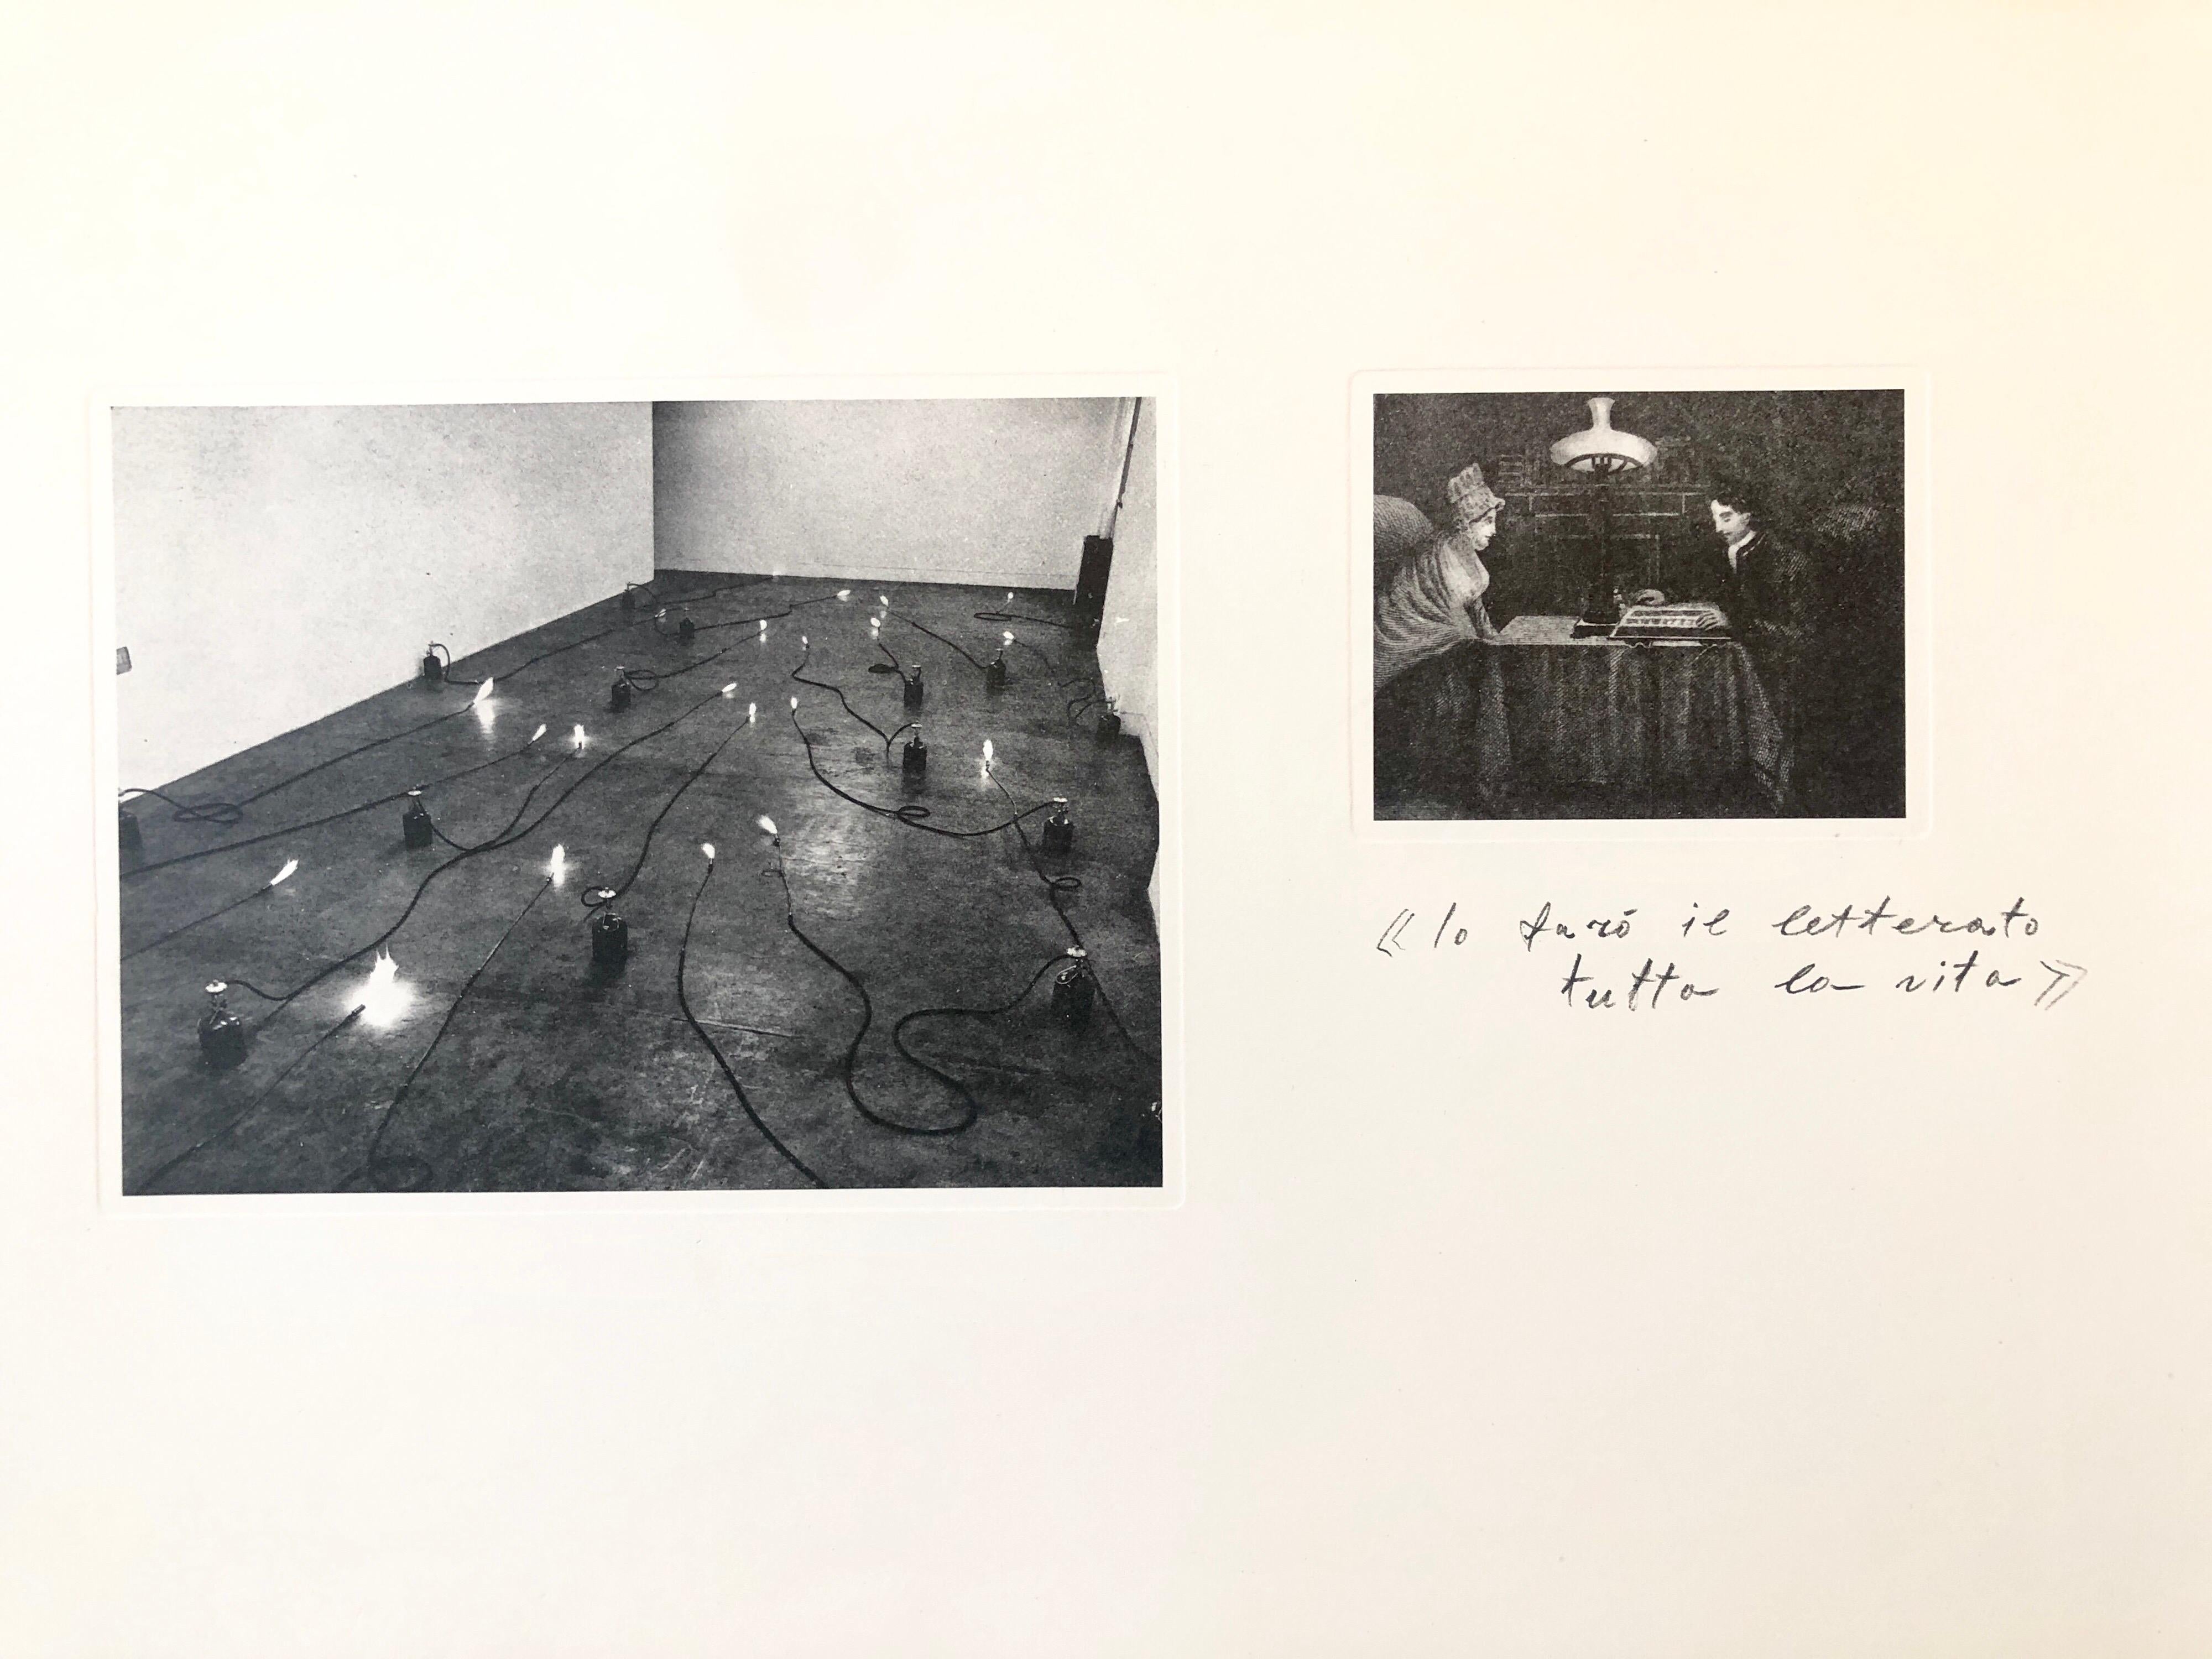 'Lo faro il litterato tutta la vita'
Photo Lithography on rag paper
hand signed lower right in pencil: Kounellis
numbered 37/90.
Provenance: The Collection of Ileana Sonnabend (Mrs Leo Castelli) & the Estate of Nina Castelli Sundell
I have seen this